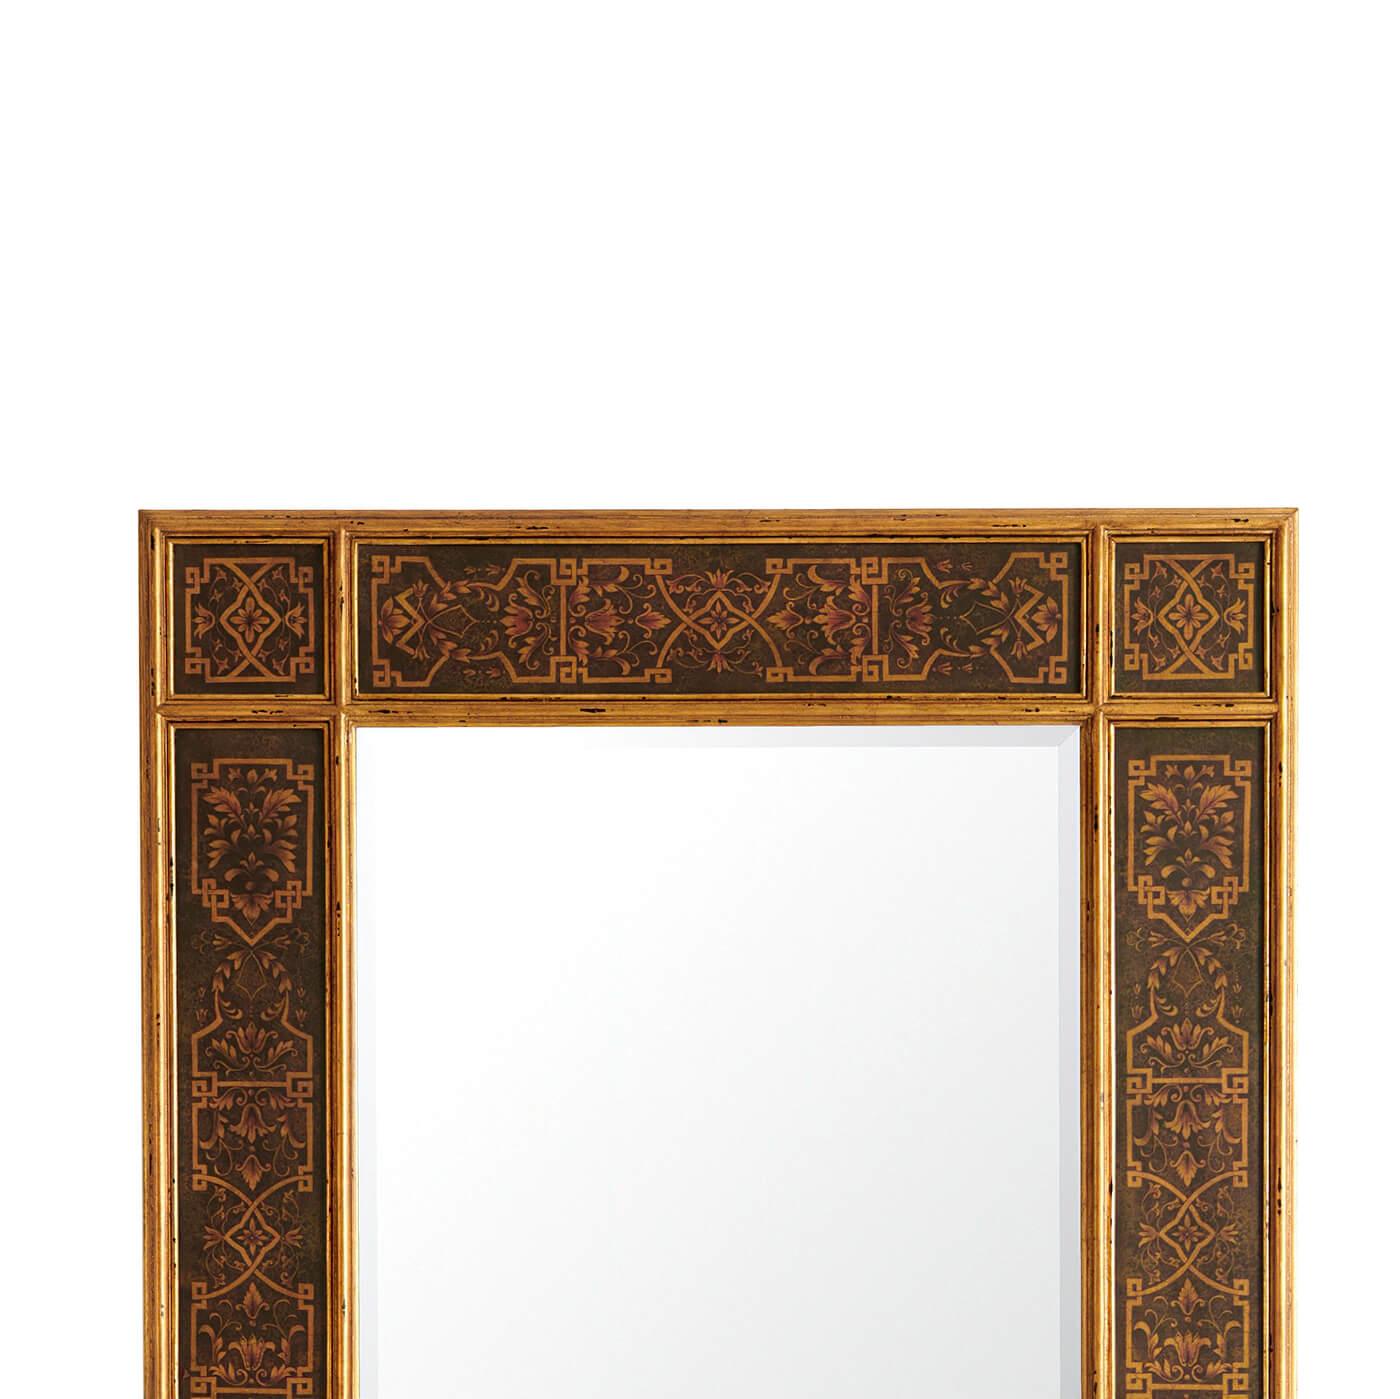 An Art Deco style decoupage mirror, reverse Kufic decoupage and giltwood framed mirror, the rectangular frame enclosing a similar beveled edge plate.

Dimensions: 36.25